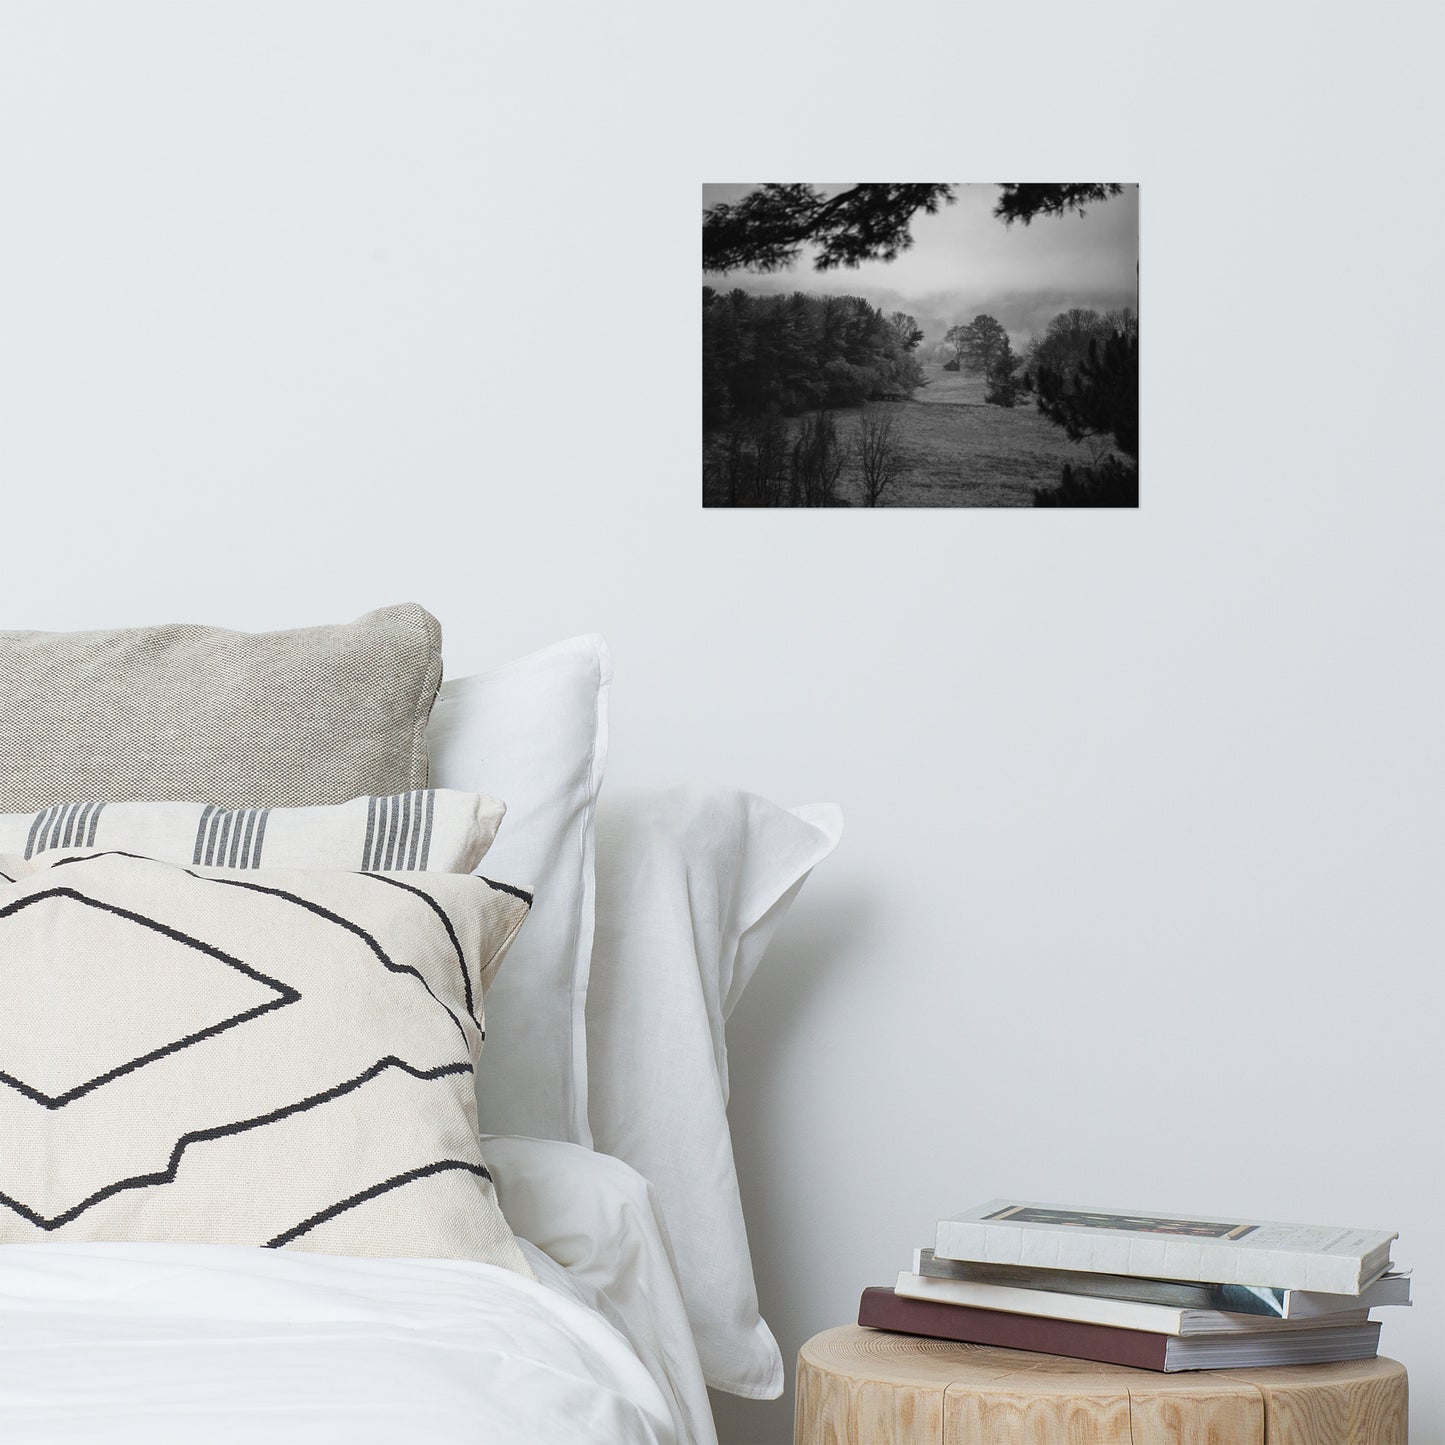 Mist of Valley Forge Black and White Landscape Photo Loose Wall Art Prints